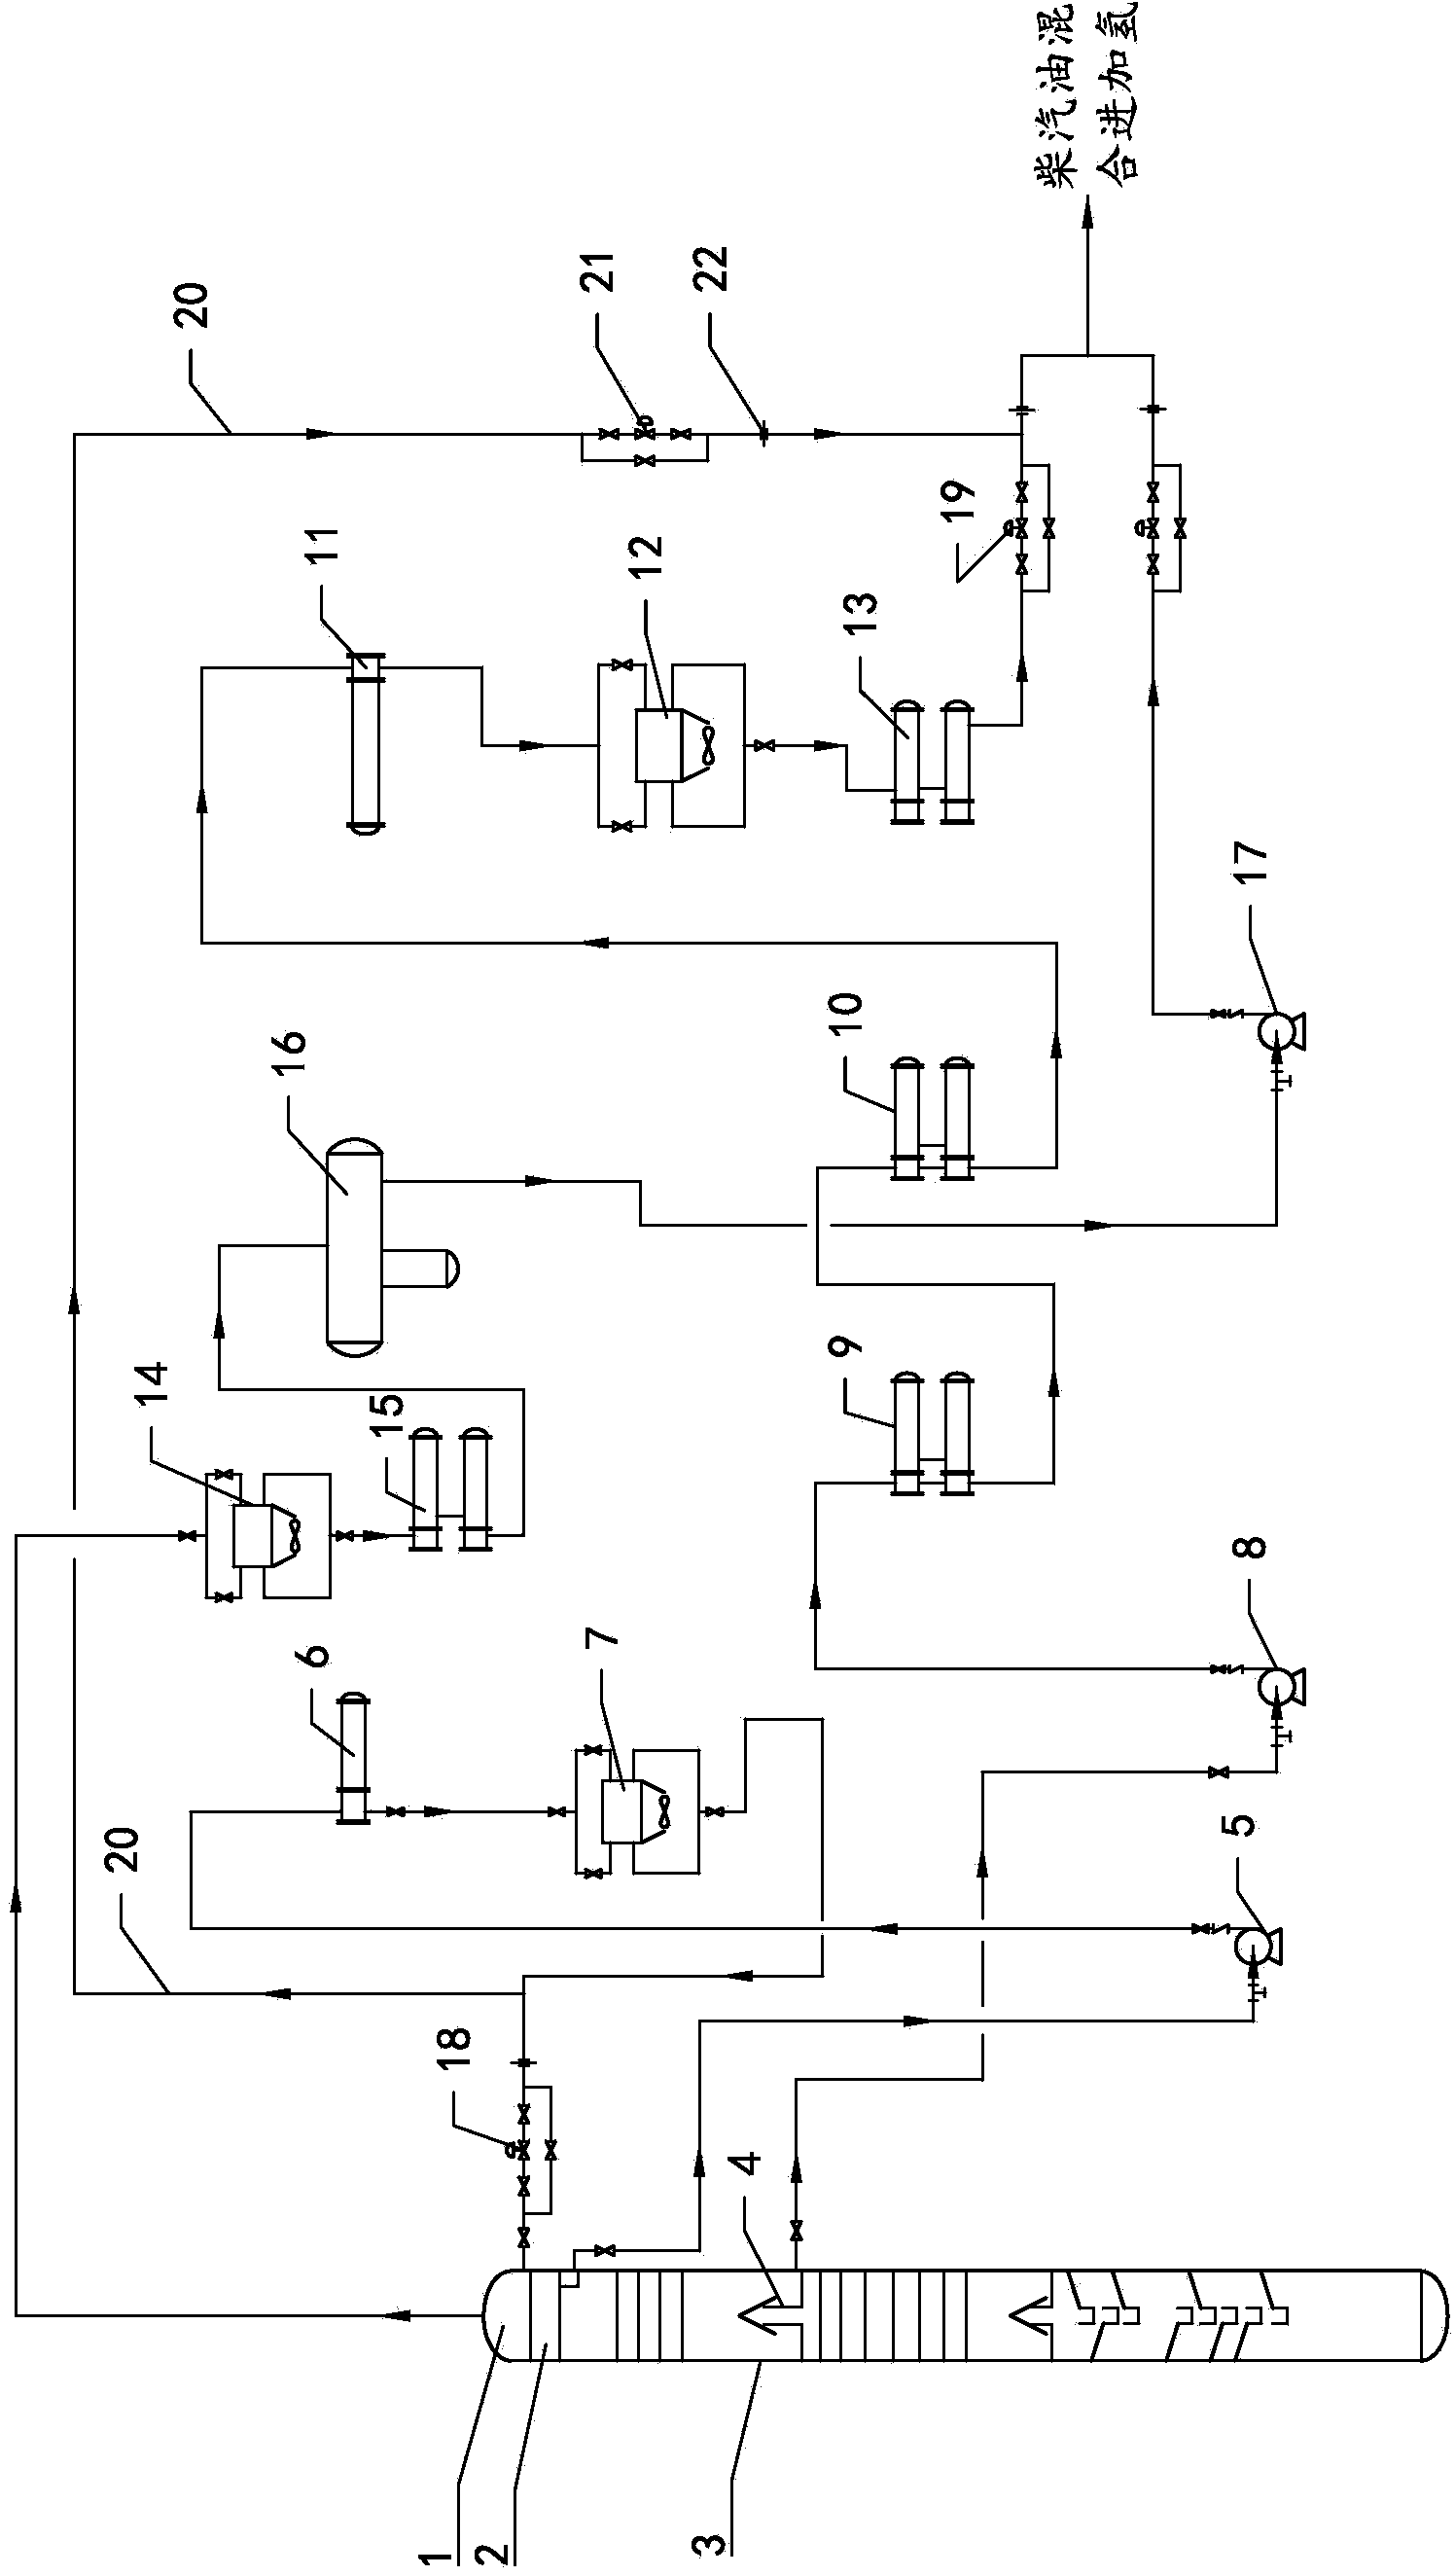 Process device for treatment of salt coagulation of fractionating column top circulation system